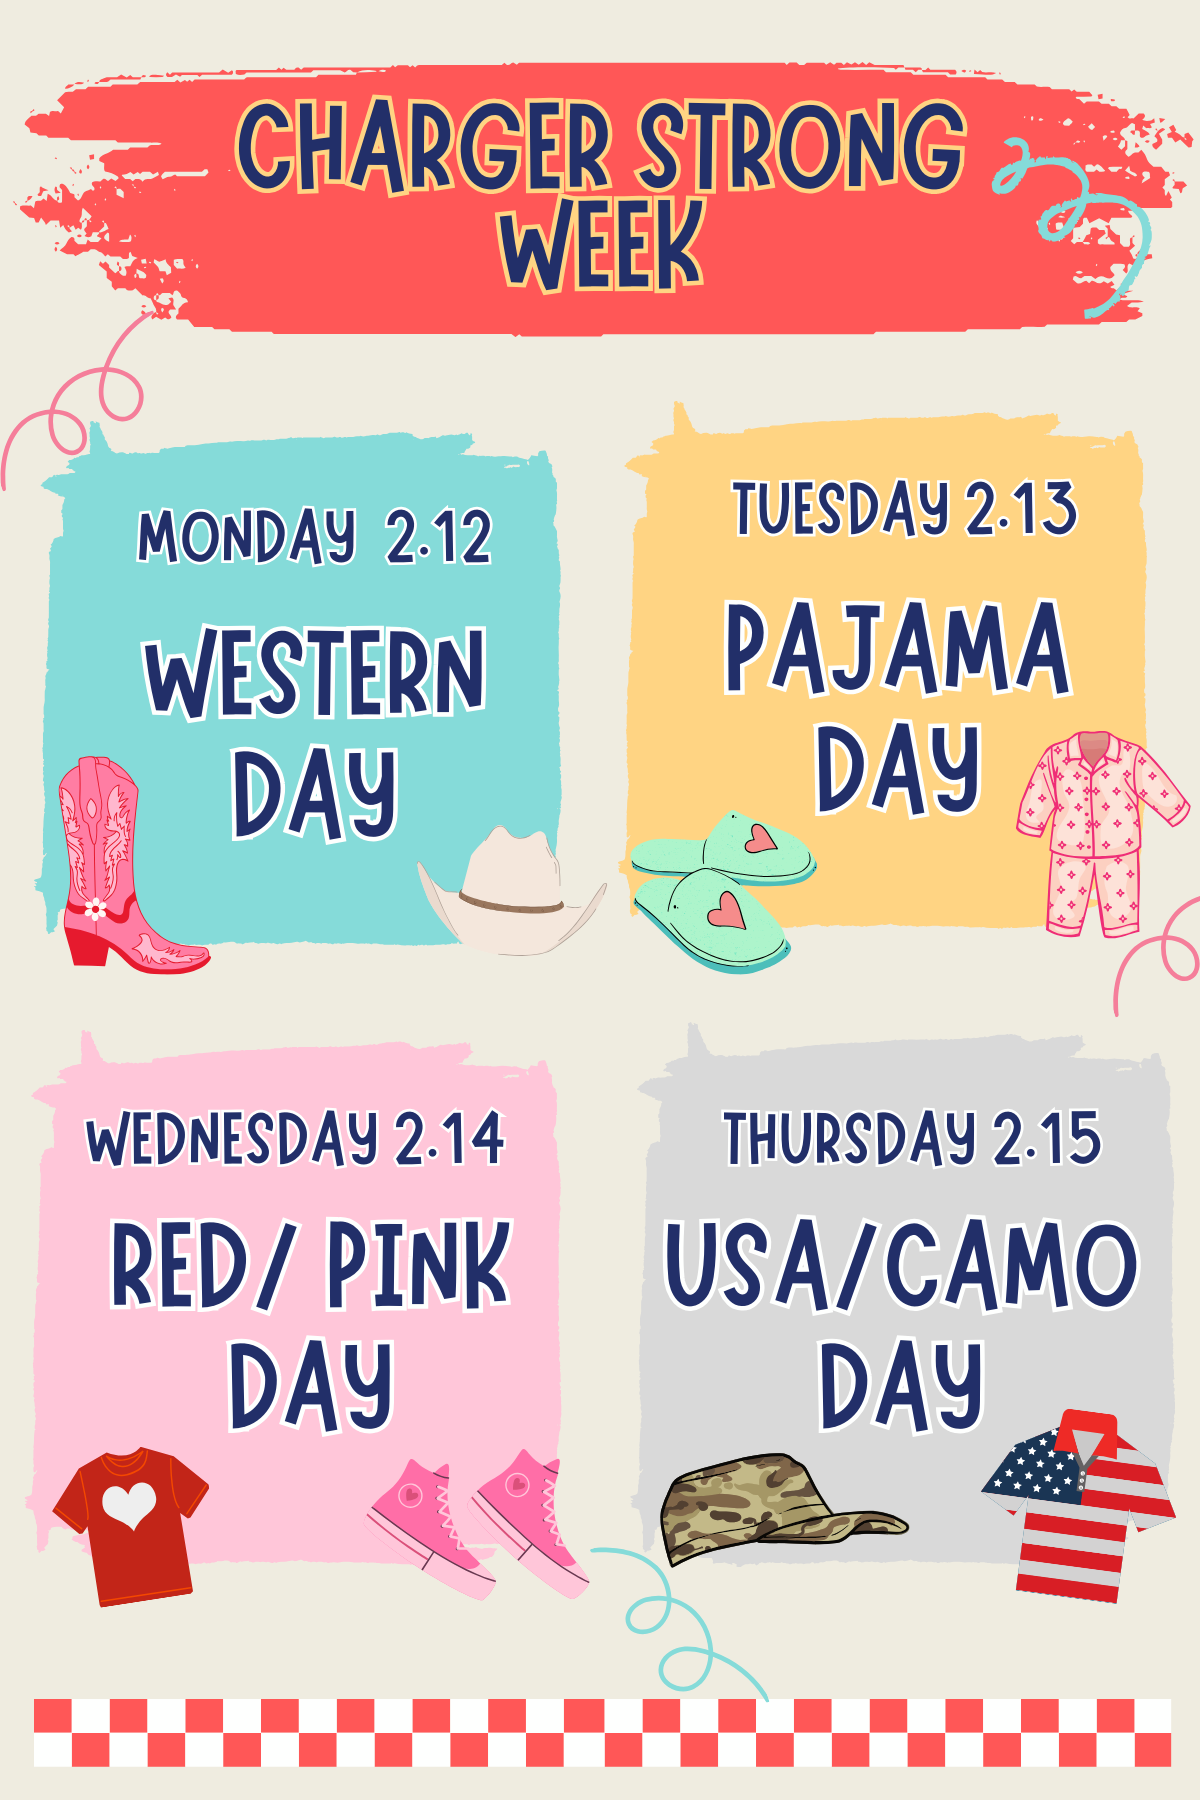 Charger Strong Week
Monday Western Day
Tuesday Pajama Day
Wednesday Red/Pink Day
Thursday USA/Camo Day